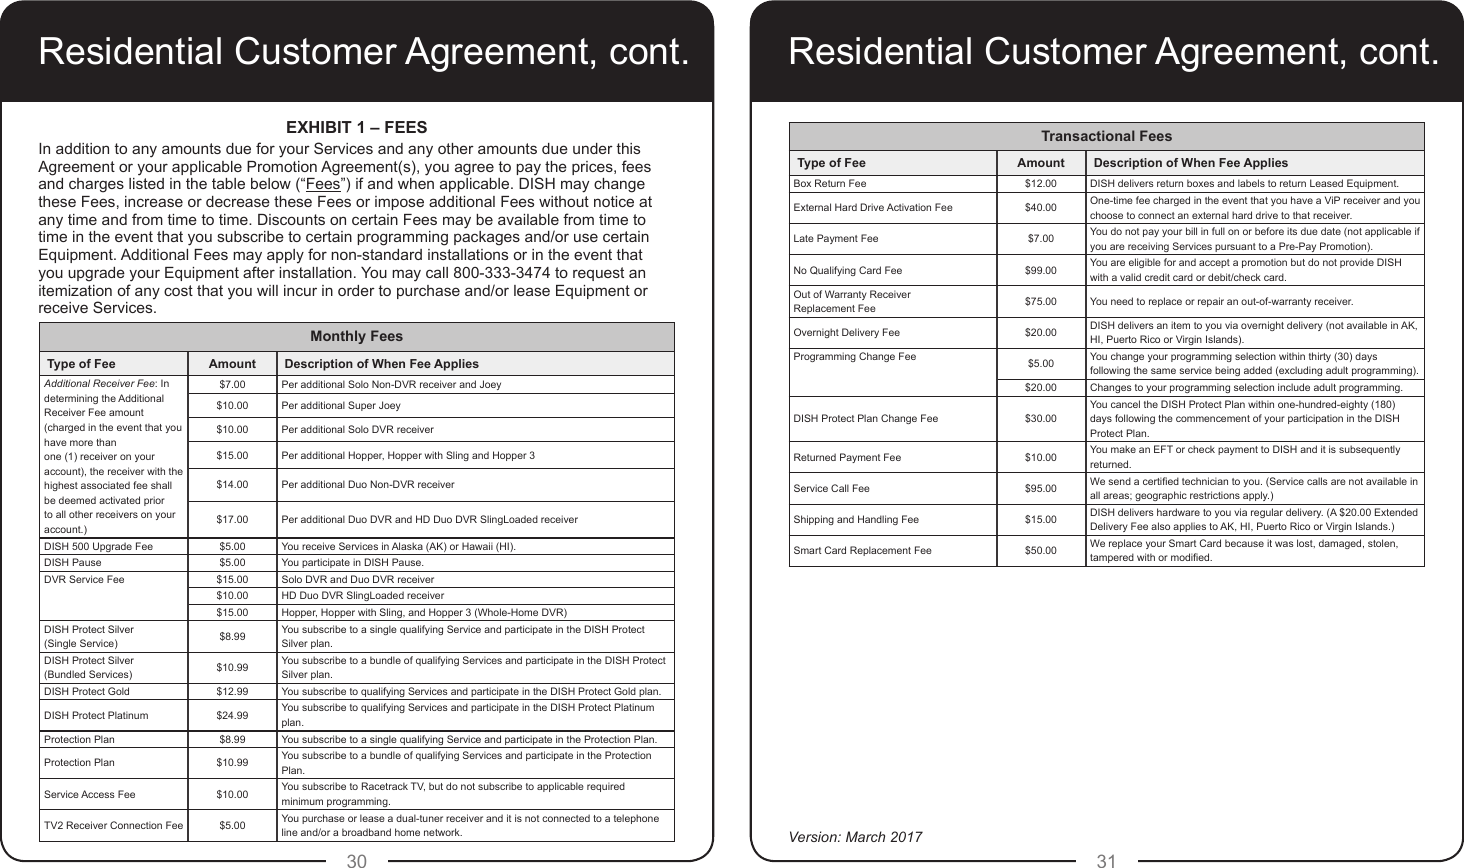 30 31Residential Customer Agreement, cont. Residential Customer Agreement, cont.Transactional FeesType of Fee Amount Description of When Fee AppliesBox Return Fee $12.00 DISH delivers return boxes and labels to return Leased Equipment.External Hard Drive Activation Fee $40.00 One-time fee charged in the event that you have a ViP receiver and you choose to connect an external hard drive to that receiver.Late Payment Fee $7.00 You do not pay your bill in full on or before its due date (not applicable if you are receiving Services pursuant to a Pre-Pay Promotion).No Qualifying Card Fee $99.00 You are eligible for and accept a promotion but do not provide DISH with a valid credit card or debit/check card.Out of Warranty Receiver  Replacement Fee $75.00 You need to replace or repair an out-of-warranty receiver.Overnight Delivery Fee $20.00 DISH delivers an item to you via overnight delivery (not available in AK, HI, Puerto Rico or Virgin Islands).Programming Change Fee $5.00 You change your programming selection within thirty (30) days following the same service being added (excluding adult programming).$20.00 Changes to your programming selection include adult programming.DISH Protect Plan Change Fee $30.00You cancel the DISH Protect Plan within one-hundred-eighty (180) days following the commencement of your participation in the DISH Protect Plan.Returned Payment Fee $10.00 You make an EFT or check payment to DISH and it is subsequently returned.Service Call Fee $95.00 We send a certied technician to you. (Service calls are not available in all areas; geographic restrictions apply.)Shipping and Handling Fee $15.00 DISH delivers hardware to you via regular delivery. (A $20.00 Extended Delivery Fee also applies to AK, HI, Puerto Rico or Virgin Islands.)Smart Card Replacement Fee $50.00 We replace your Smart Card because it was lost, damaged, stolen, tampered with or modied.Version: March 2017EXHIBIT 1 – FEESIn addition to any amounts due for your Services and any other amounts due under this Agreement or your applicable Promotion Agreement(s), you agree to pay the prices, fees and charges listed in the table below (“Fees”) if and when applicable. DISH may change these Fees, increase or decrease these Fees or impose additional Fees without notice at any time and from time to time. Discounts on certain Fees may be available from time to time in the event that you subscribe to certain programming packages and/or use certain Equipment. Additional Fees may apply for non-standard installations or in the event that you upgrade your Equipment after installation. You may call 800-333-3474 to request an itemization of any cost that you will incur in order to purchase and/or lease Equipment or receive Services.Monthly FeesType of Fee Amount Description of When Fee AppliesAdditional Receiver Fee: In determining the Additional Receiver Fee amount (charged in the event that you have more than  one (1) receiver on your account), the receiver with the highest associated fee shall be deemed activated prior to all other receivers on your account.)$7.00 Per additional Solo Non-DVR receiver and Joey$10.00 Per additional Super Joey$10.00 Per additional Solo DVR receiver$15.00  Per additional Hopper, Hopper with Sling and Hopper 3$14.00 Per additional Duo Non-DVR receiver$17.00 Per additional Duo DVR and HD Duo DVR SlingLoaded receiverDISH 500 Upgrade Fee $5.00 You receive Services in Alaska (AK) or Hawaii (HI).DISH Pause $5.00 You participate in DISH Pause.DVR Service Fee $15.00 Solo DVR and Duo DVR receiver$10.00 HD Duo DVR SlingLoaded receiver$15.00 Hopper, Hopper with Sling, and Hopper 3 (Whole-Home DVR)DISH Protect Silver (Single Service) $8.99 You subscribe to a single qualifying Service and participate in the DISH Protect Silver plan.DISH Protect Silver (Bundled Services) $10.99 You subscribe to a bundle of qualifying Services and participate in the DISH Protect Silver plan.DISH Protect Gold $12.99 You subscribe to qualifying Services and participate in the DISH Protect Gold plan.DISH Protect Platinum $24.99 You subscribe to qualifying Services and participate in the DISH Protect Platinum plan.Protection Plan $8.99 You subscribe to a single qualifying Service and participate in the Protection Plan.Protection Plan $10.99 You subscribe to a bundle of qualifying Services and participate in the Protection Plan.Service Access Fee $10.00 You subscribe to Racetrack TV, but do not subscribe to applicable required minimum programming.TV2 Receiver Connection Fee $5.00 You purchase or lease a dual-tuner receiver and it is not connected to a telephone line and/or a broadband home network.